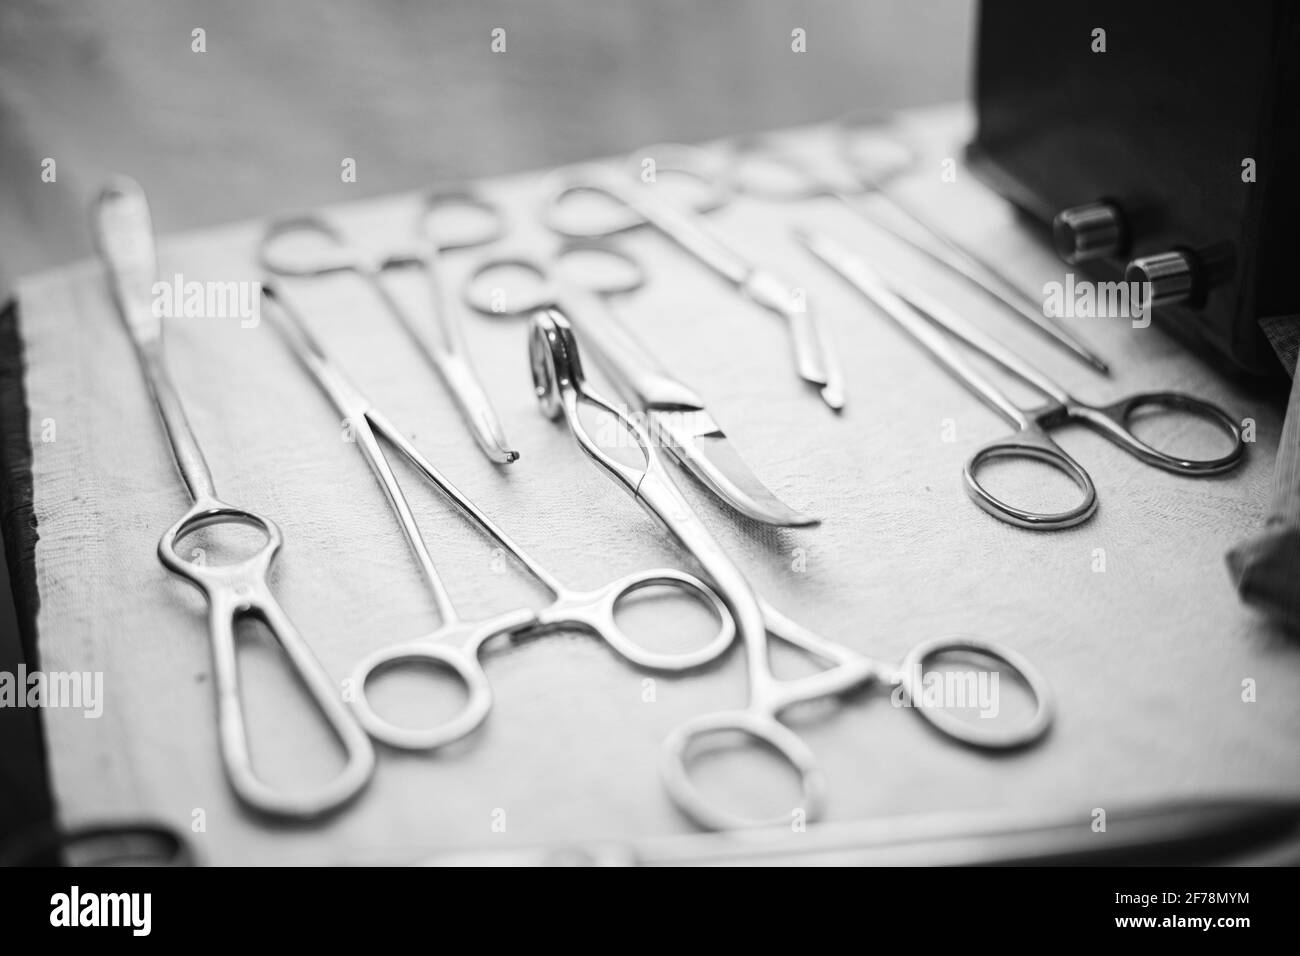 Old medical and surgical instruments. German Deutsch Wehrmacht World War II Times Many Old surgical instruments For surgery. WWII WW2. Black And White Stock Photo